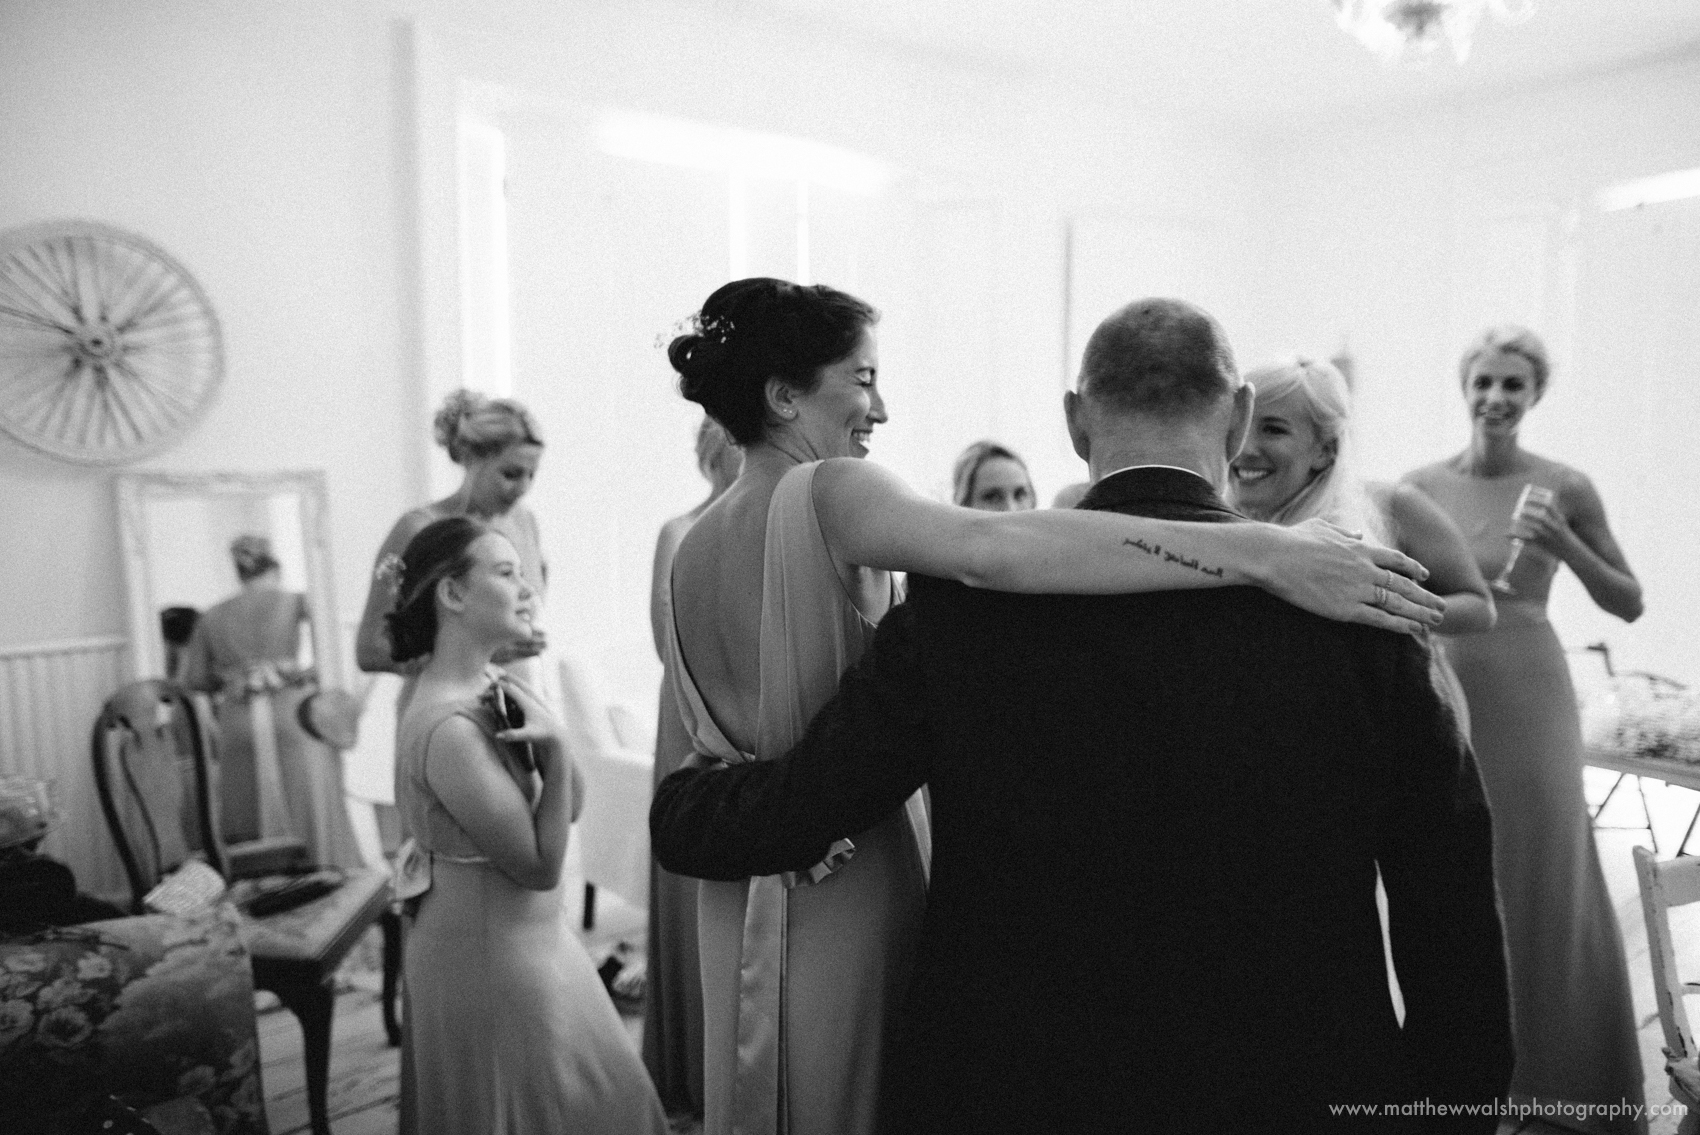 Father of the bride is welcomed into the room by the bride and bridesmaids